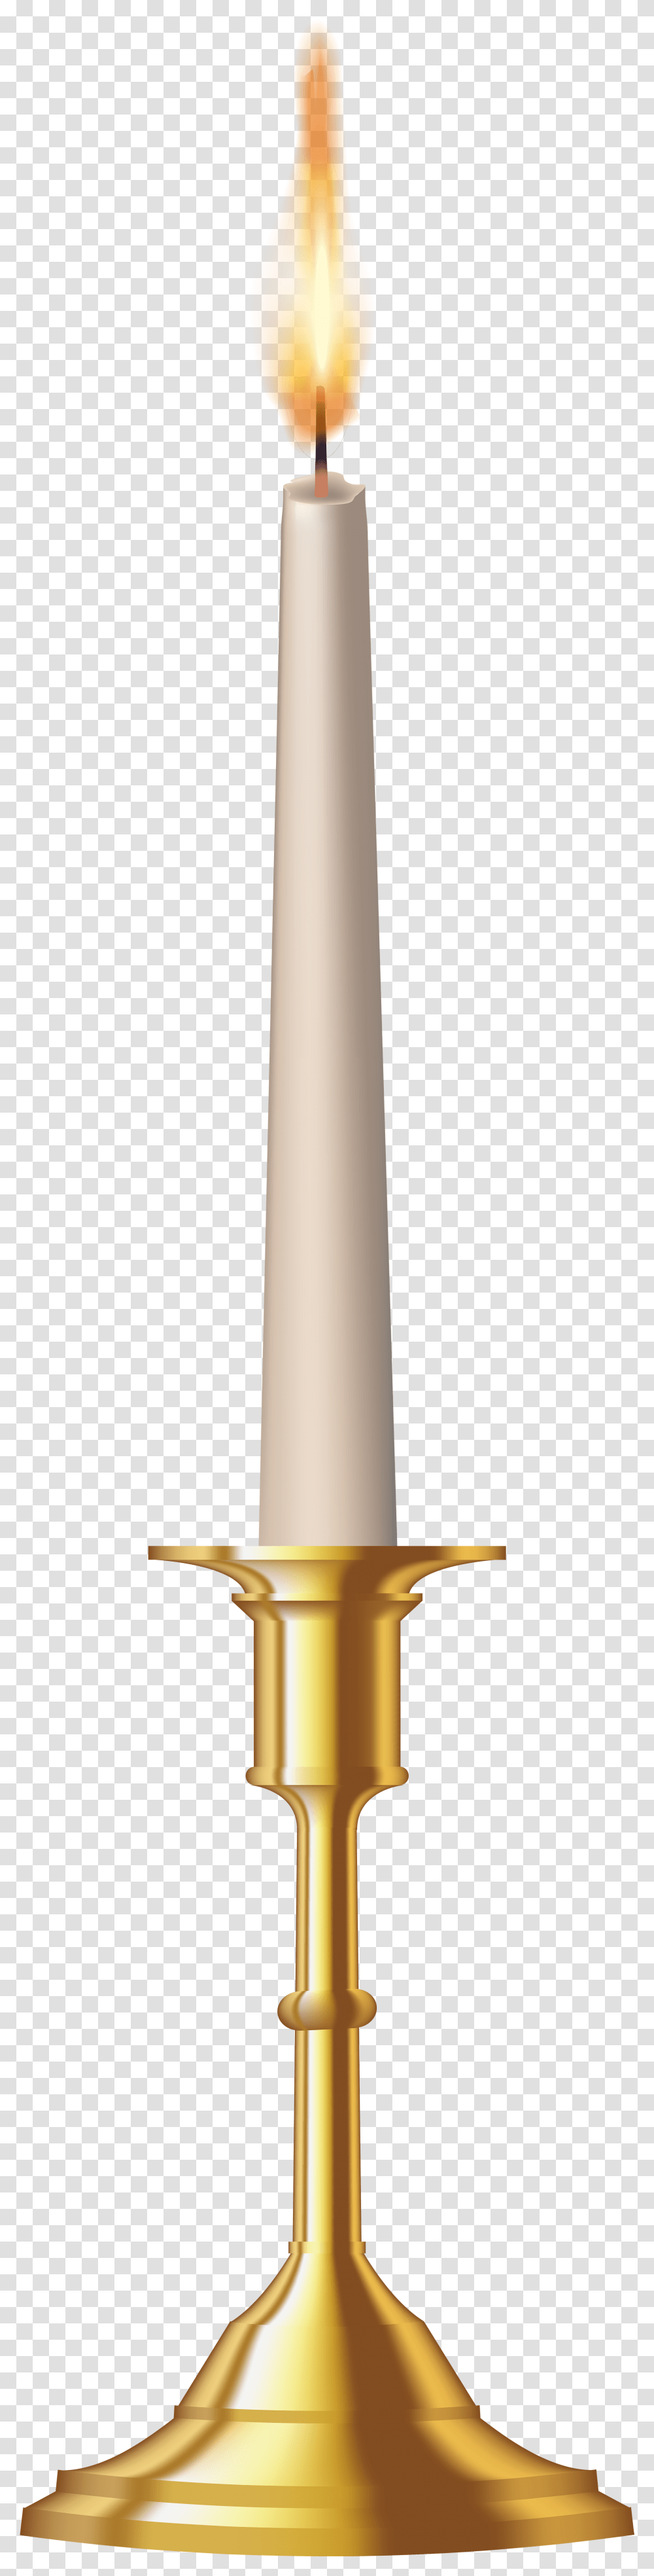 Golden Candlestick Clip Art Candle Stick, Lamp, Weapon, Weaponry, Sword Transparent Png